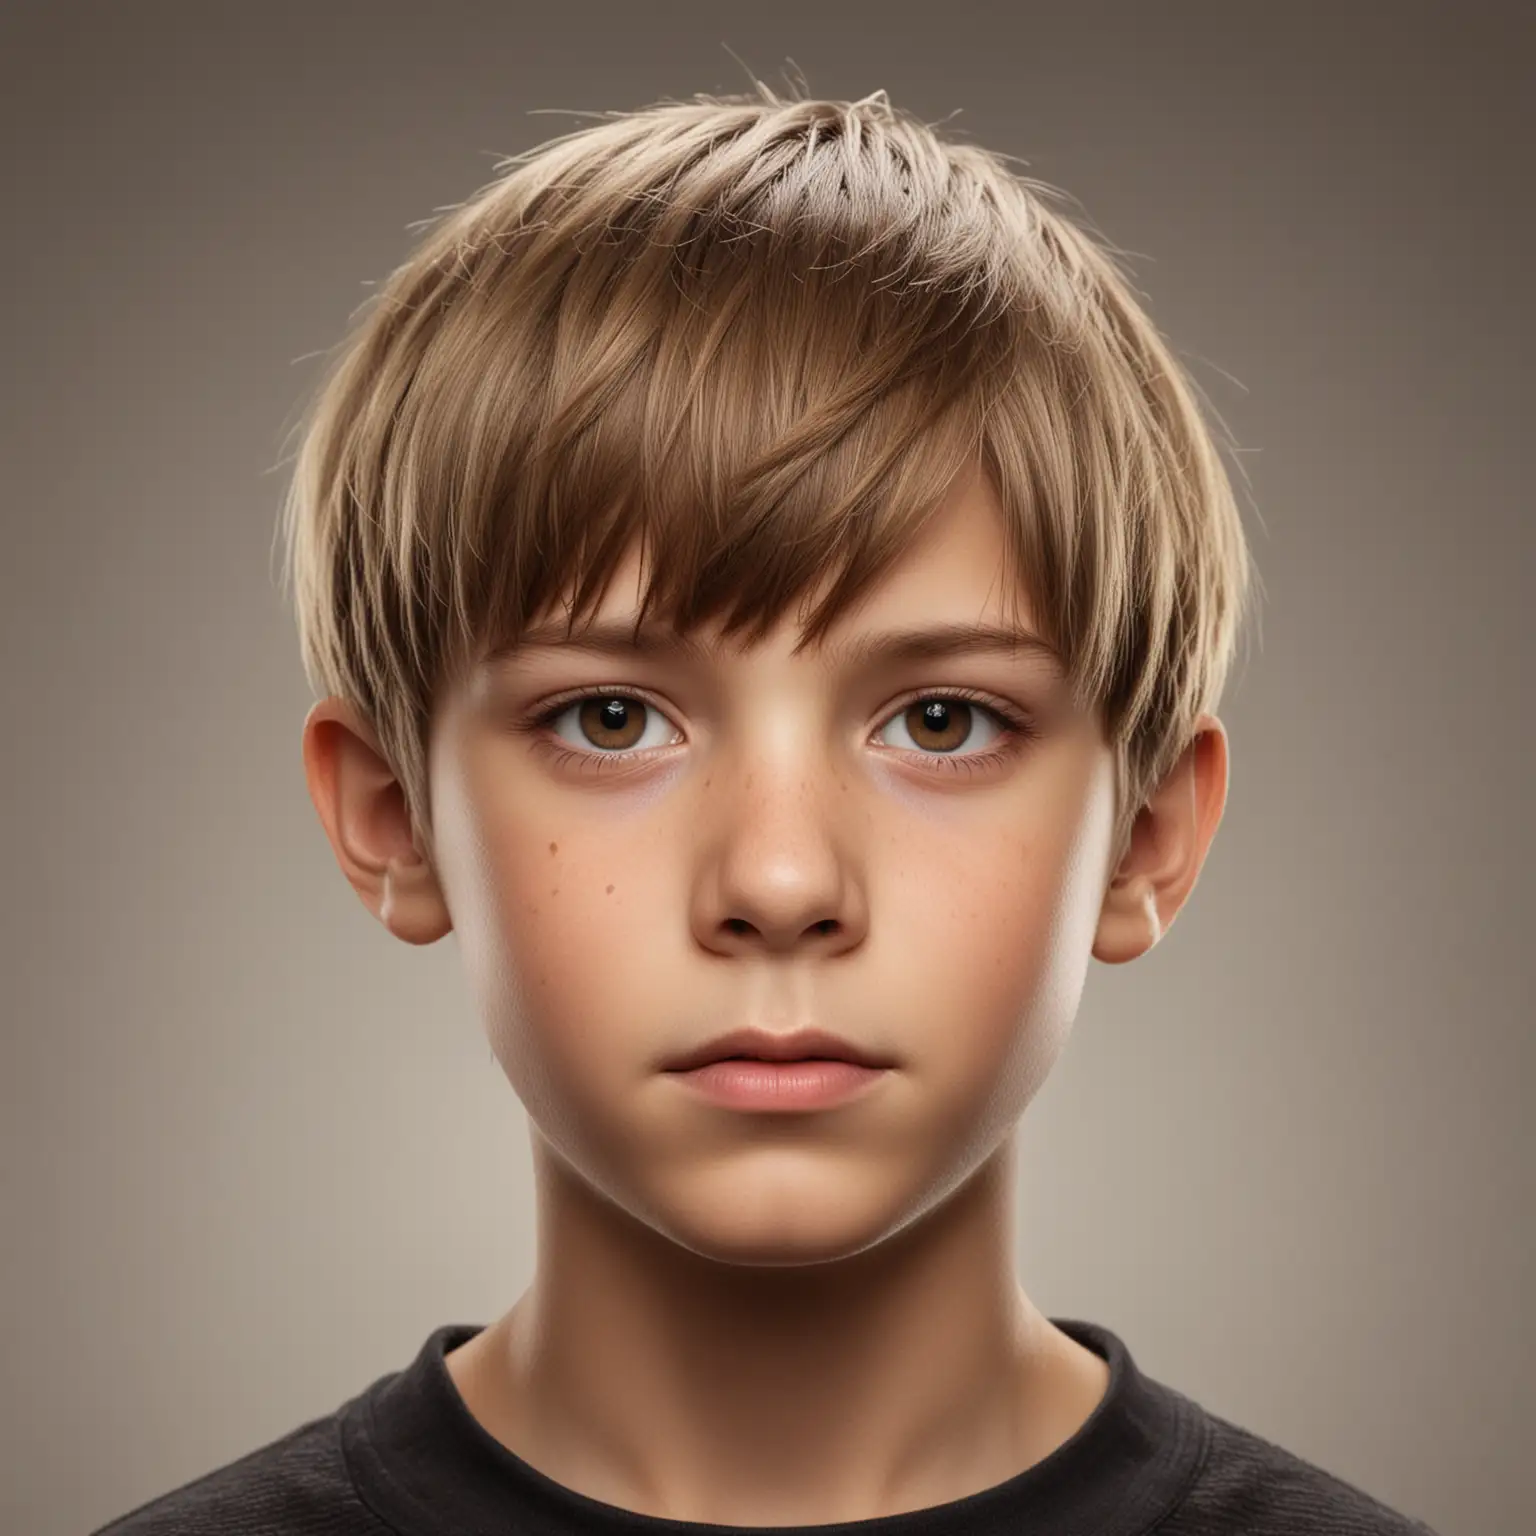 Portrait of ElevenYearOld Boy with Shiny Hair and Light Brown Bowl Cut Hairstyle